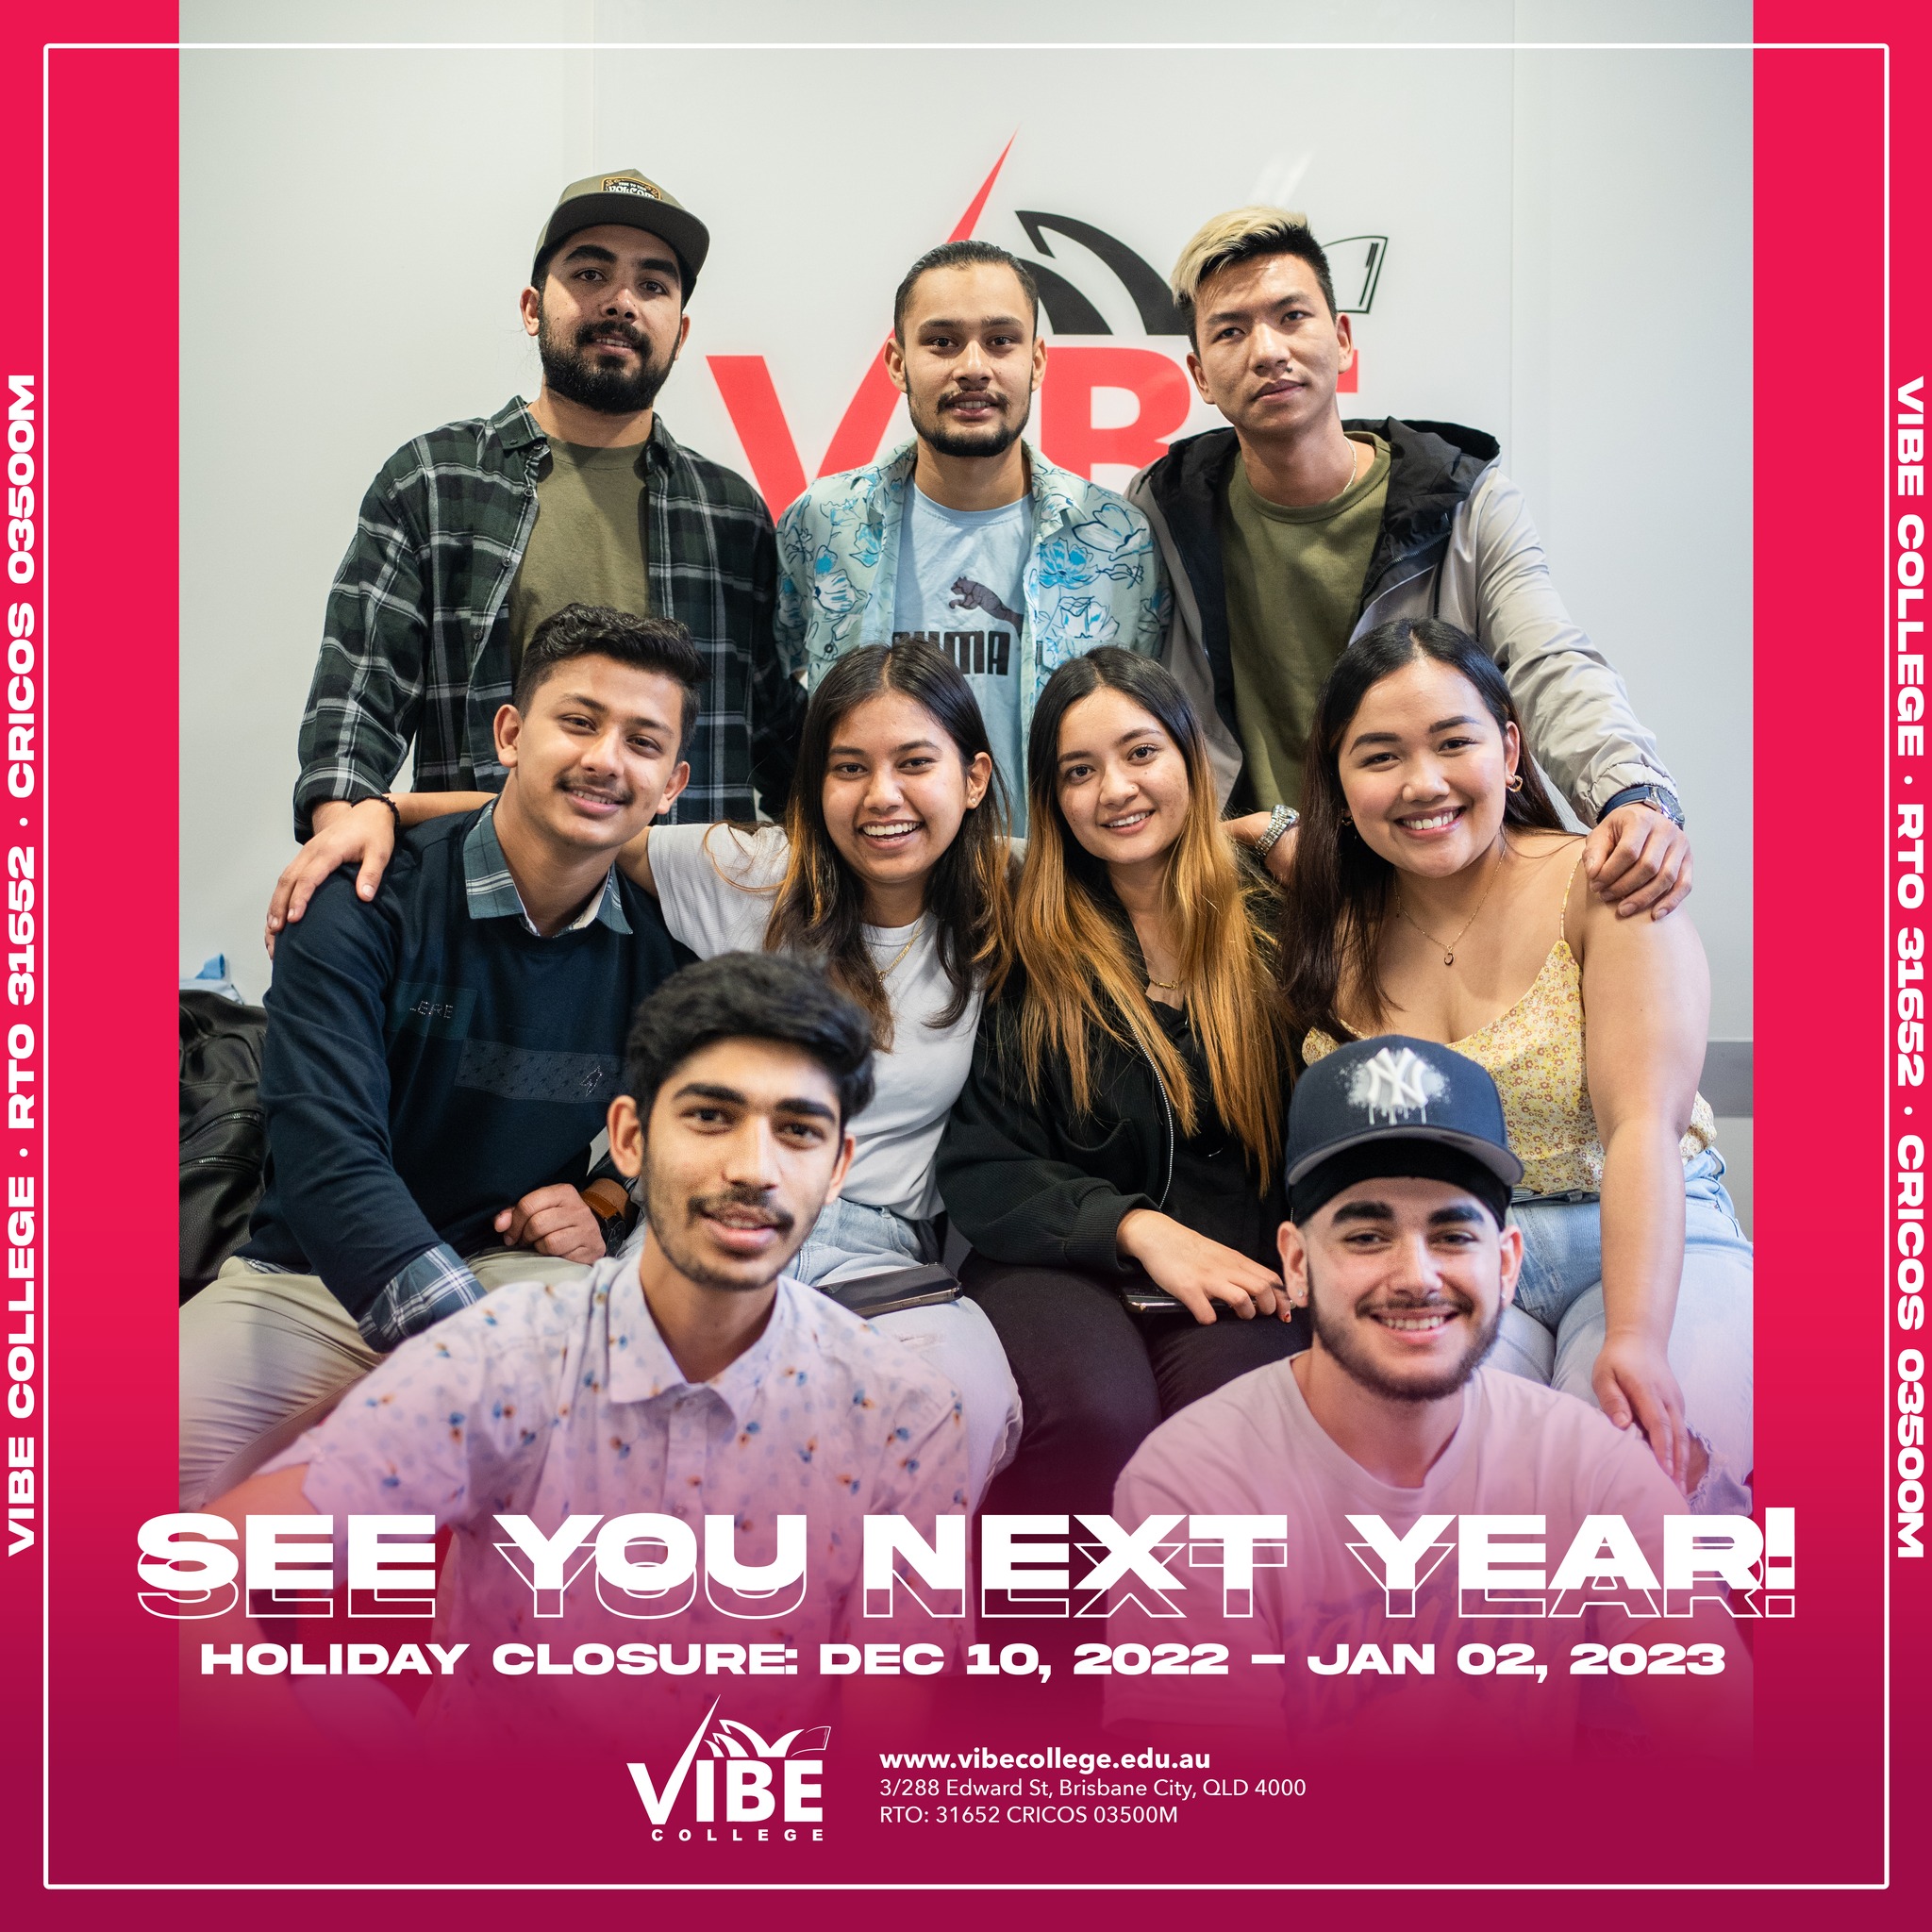 See you next year, Vibe students! Vibe College